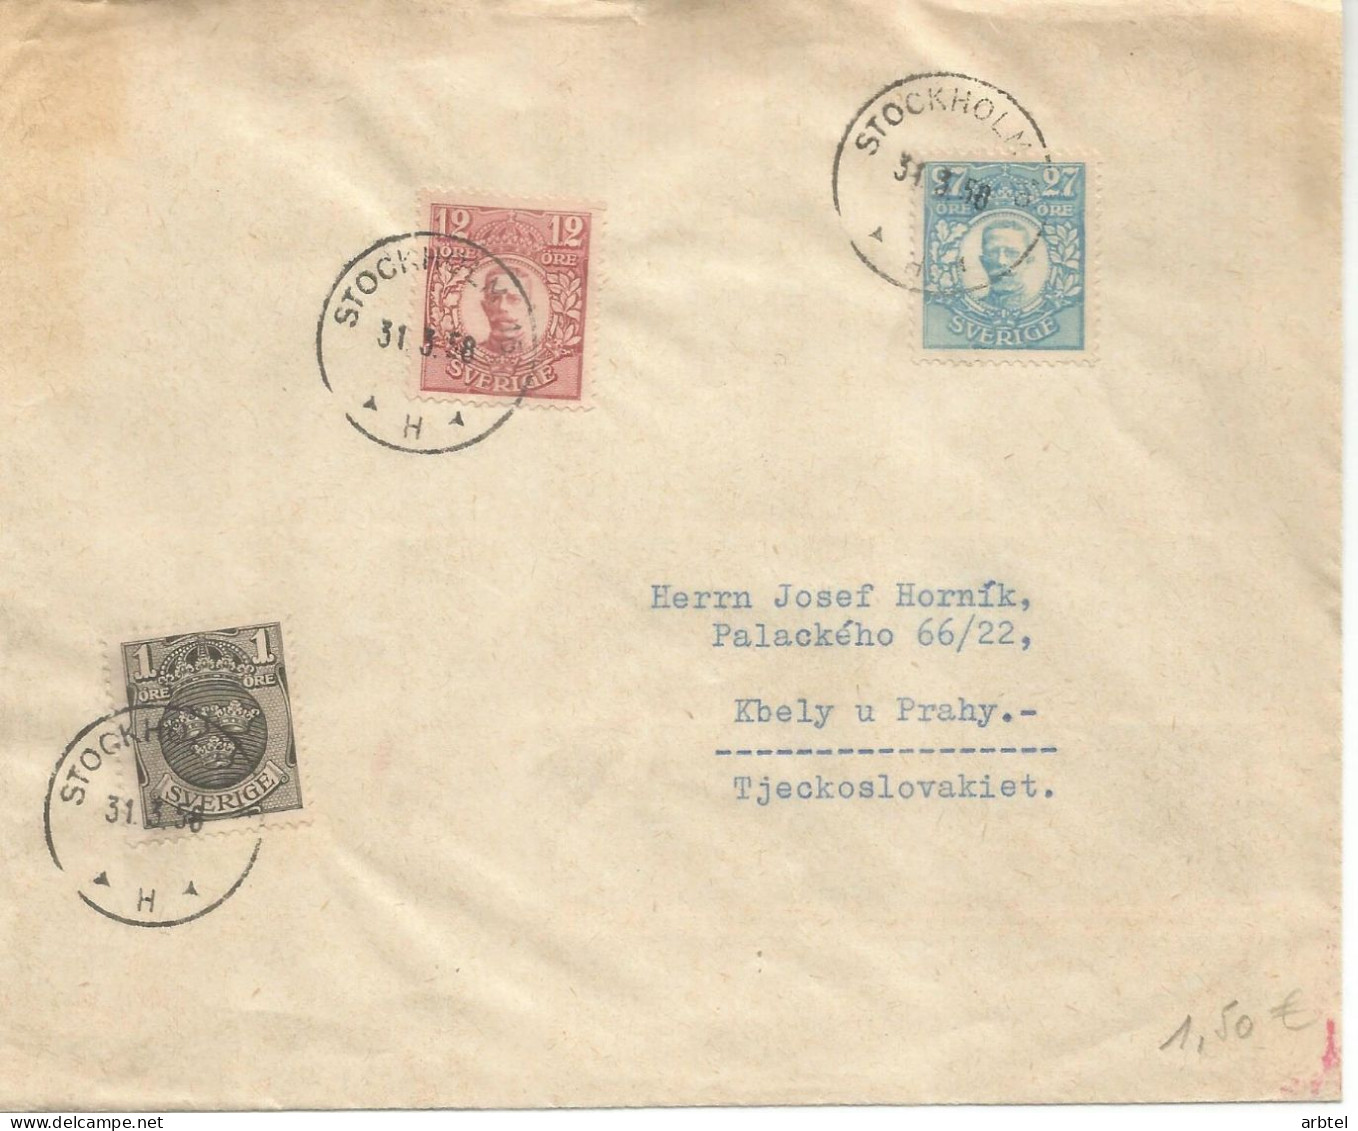 SUECOA STOCKHOLM 1958 A KBELY PRAHY CHECOSLOVAQUIA - Covers & Documents